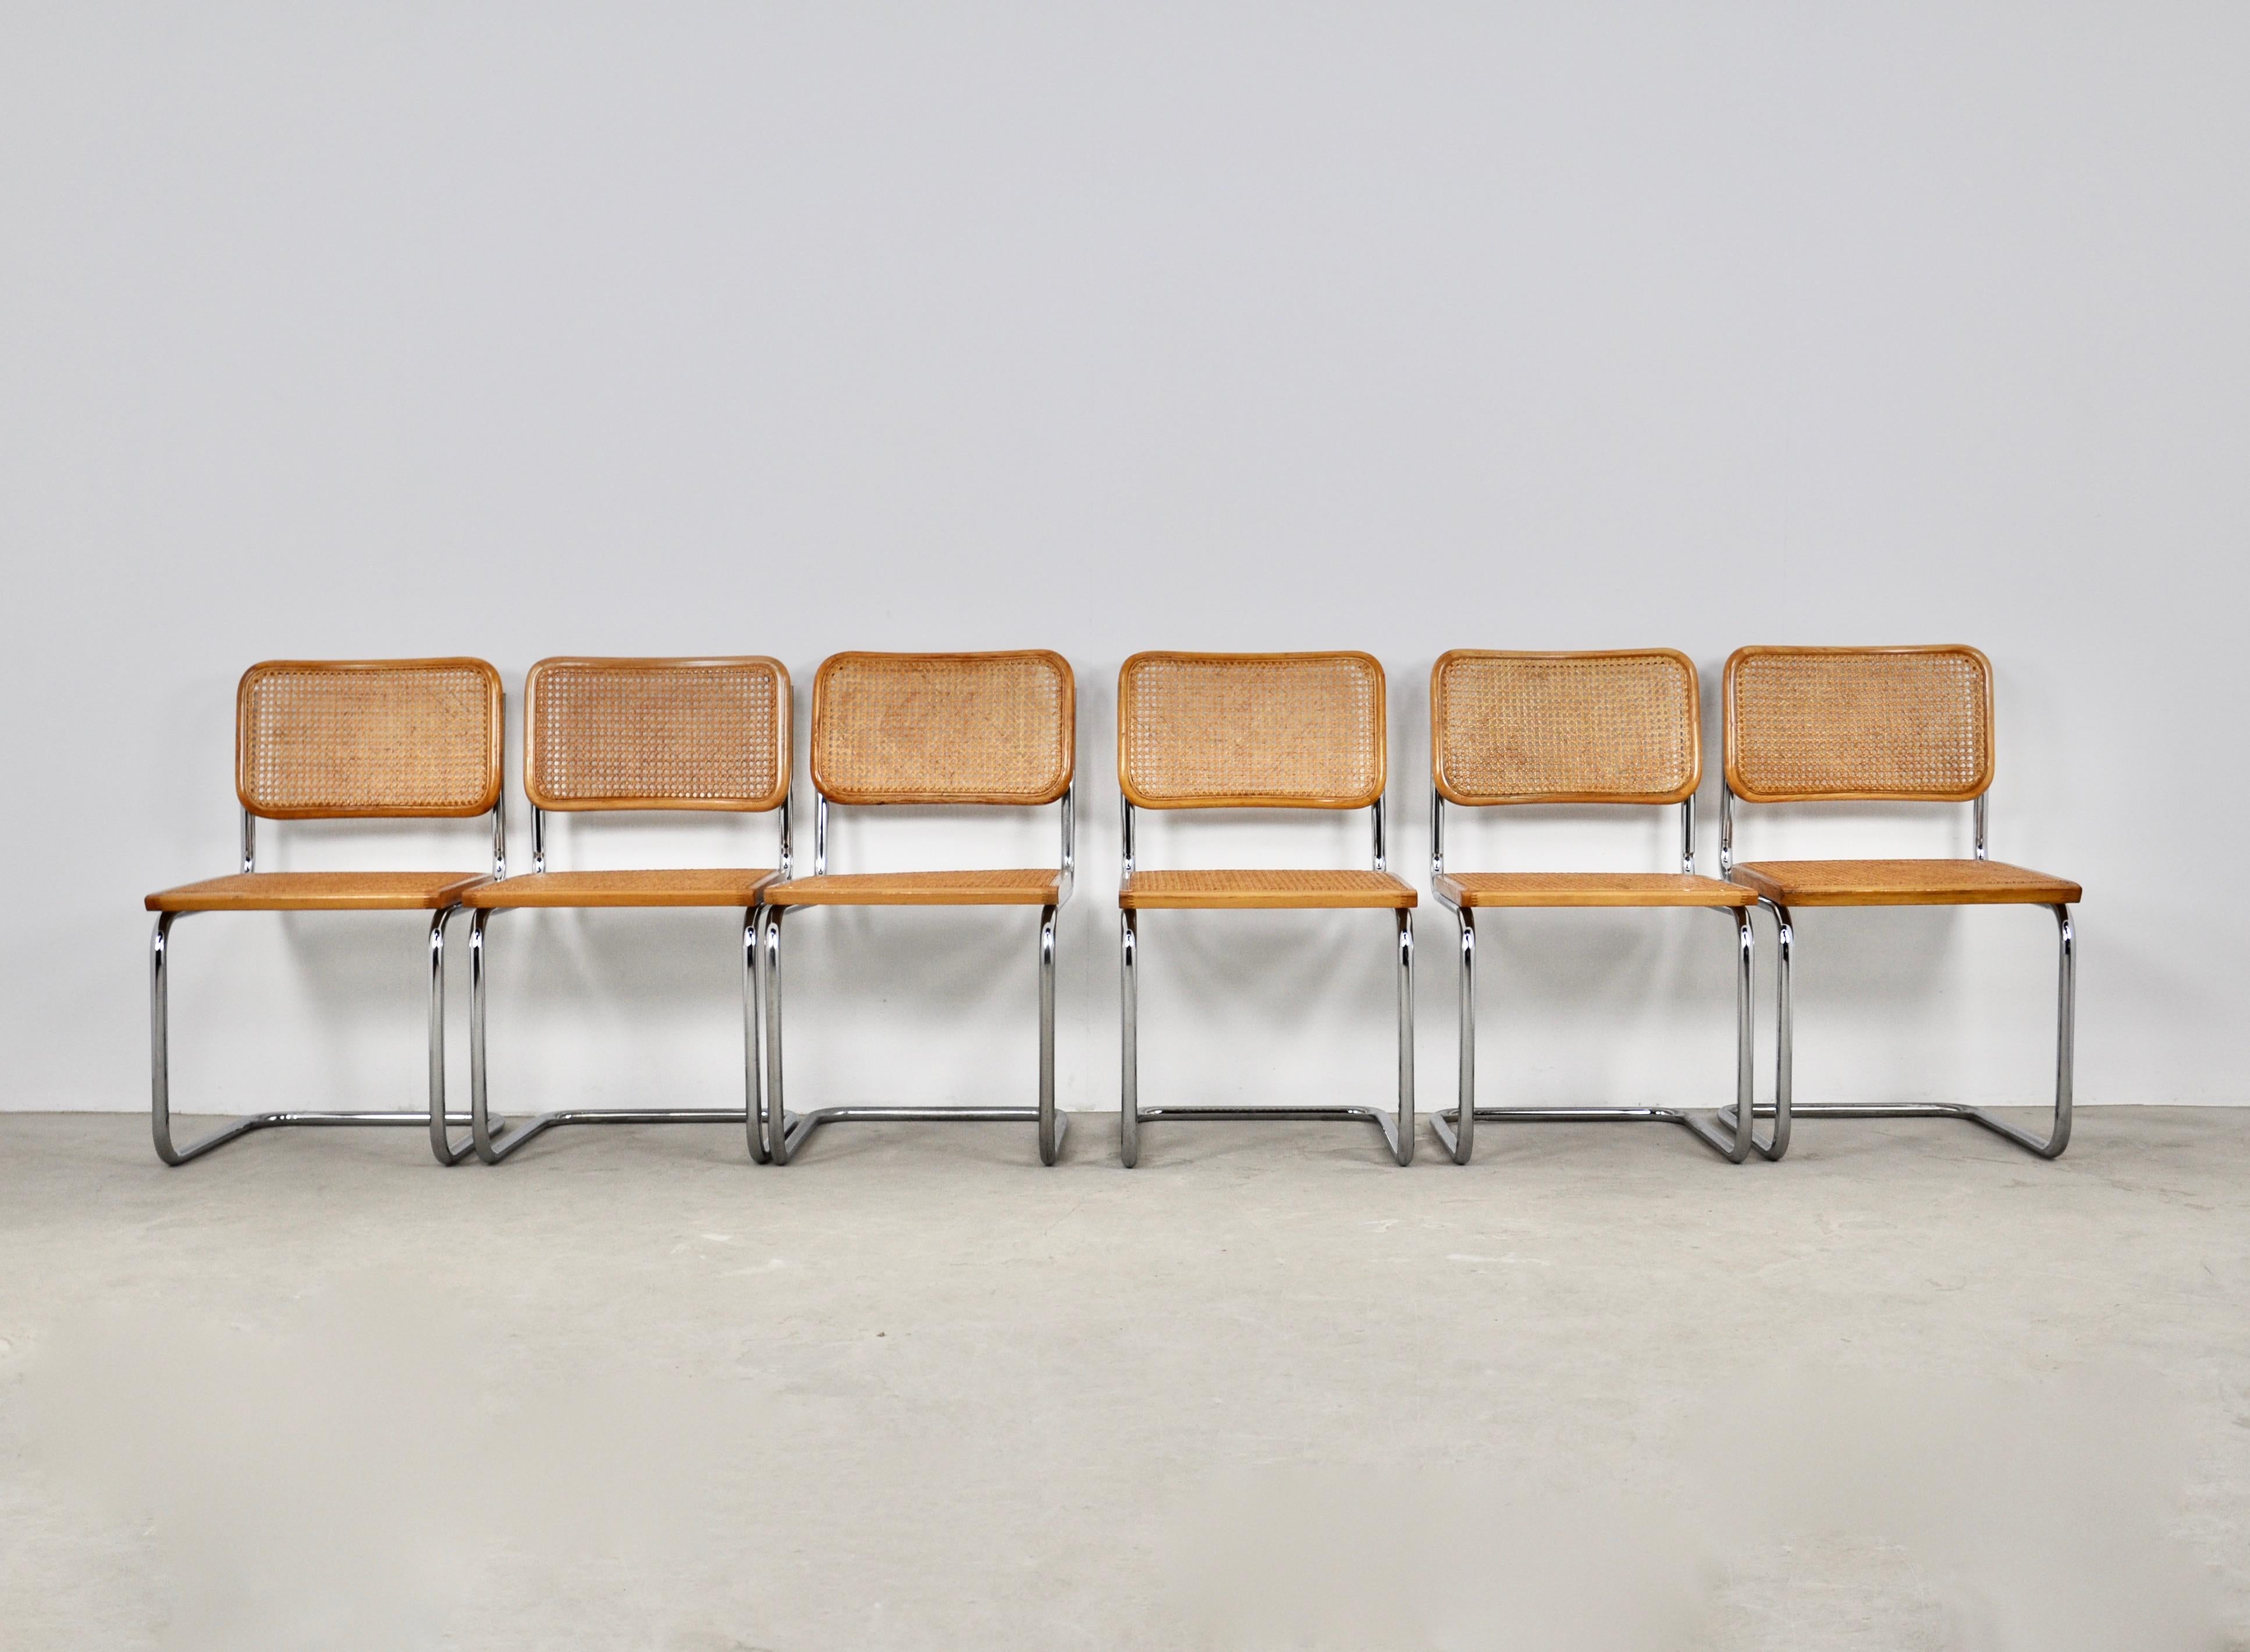 Set of 6 chairs in metal, wood and cane. Wear due to time and age of the chairs (see photo) 
Measure: Seat height: 45cm.